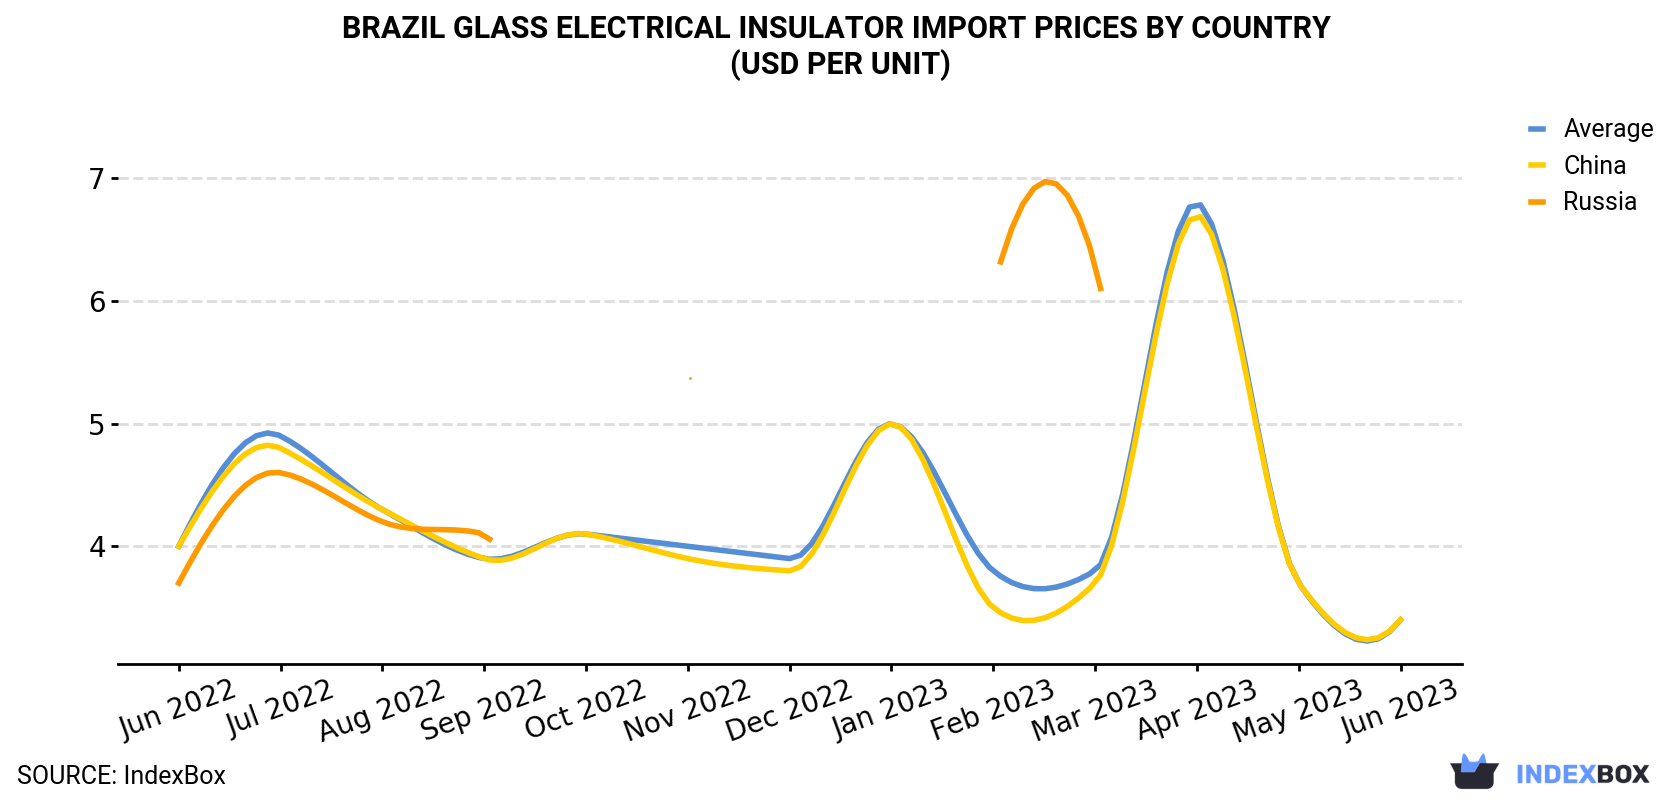 Brazil Glass Electrical Insulator Import Prices By Country (USD Per Unit)